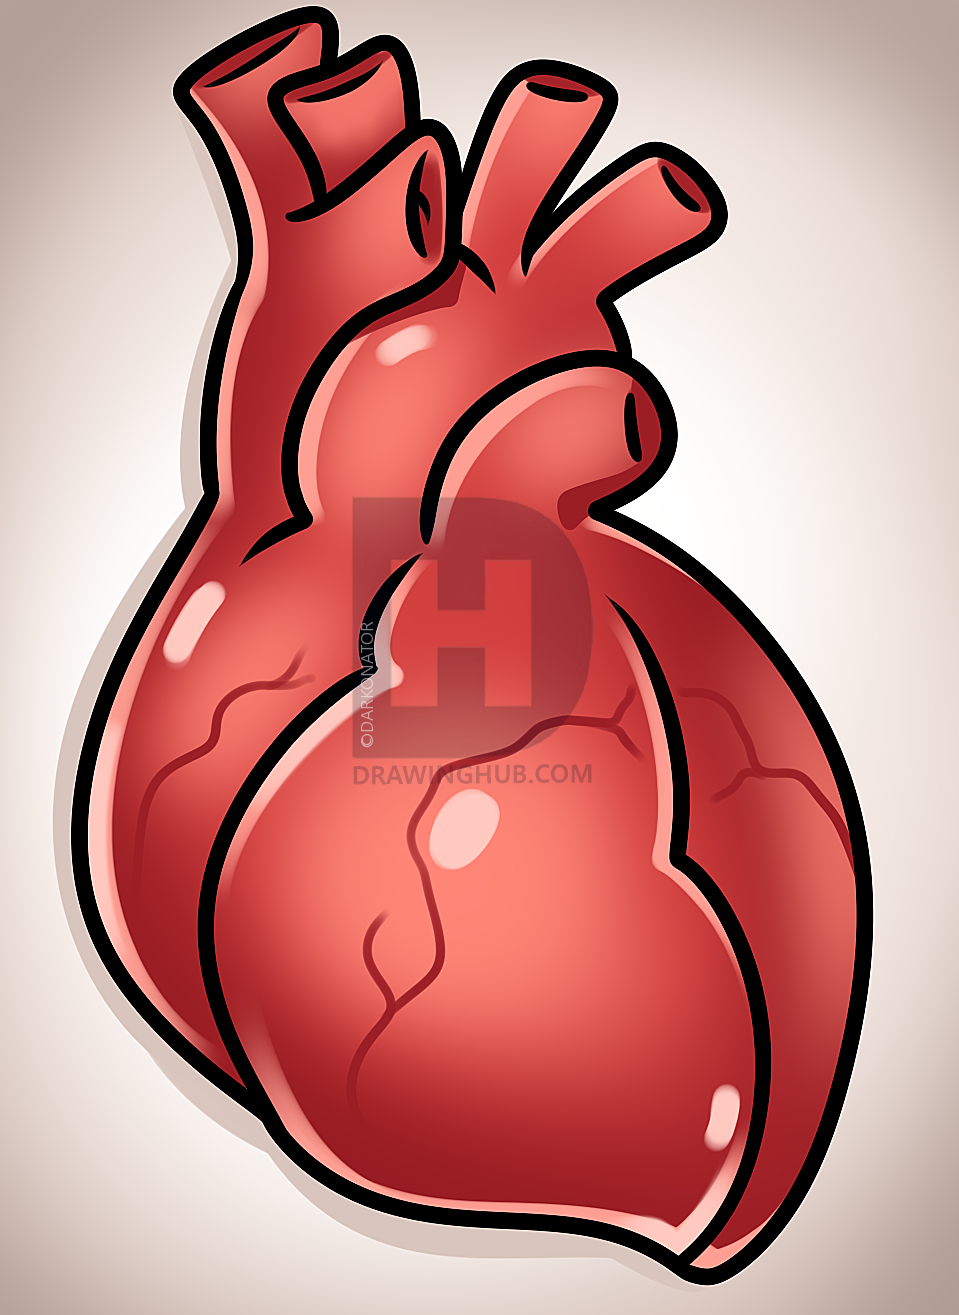 The best free Human heart clipart images. Download from 3903.